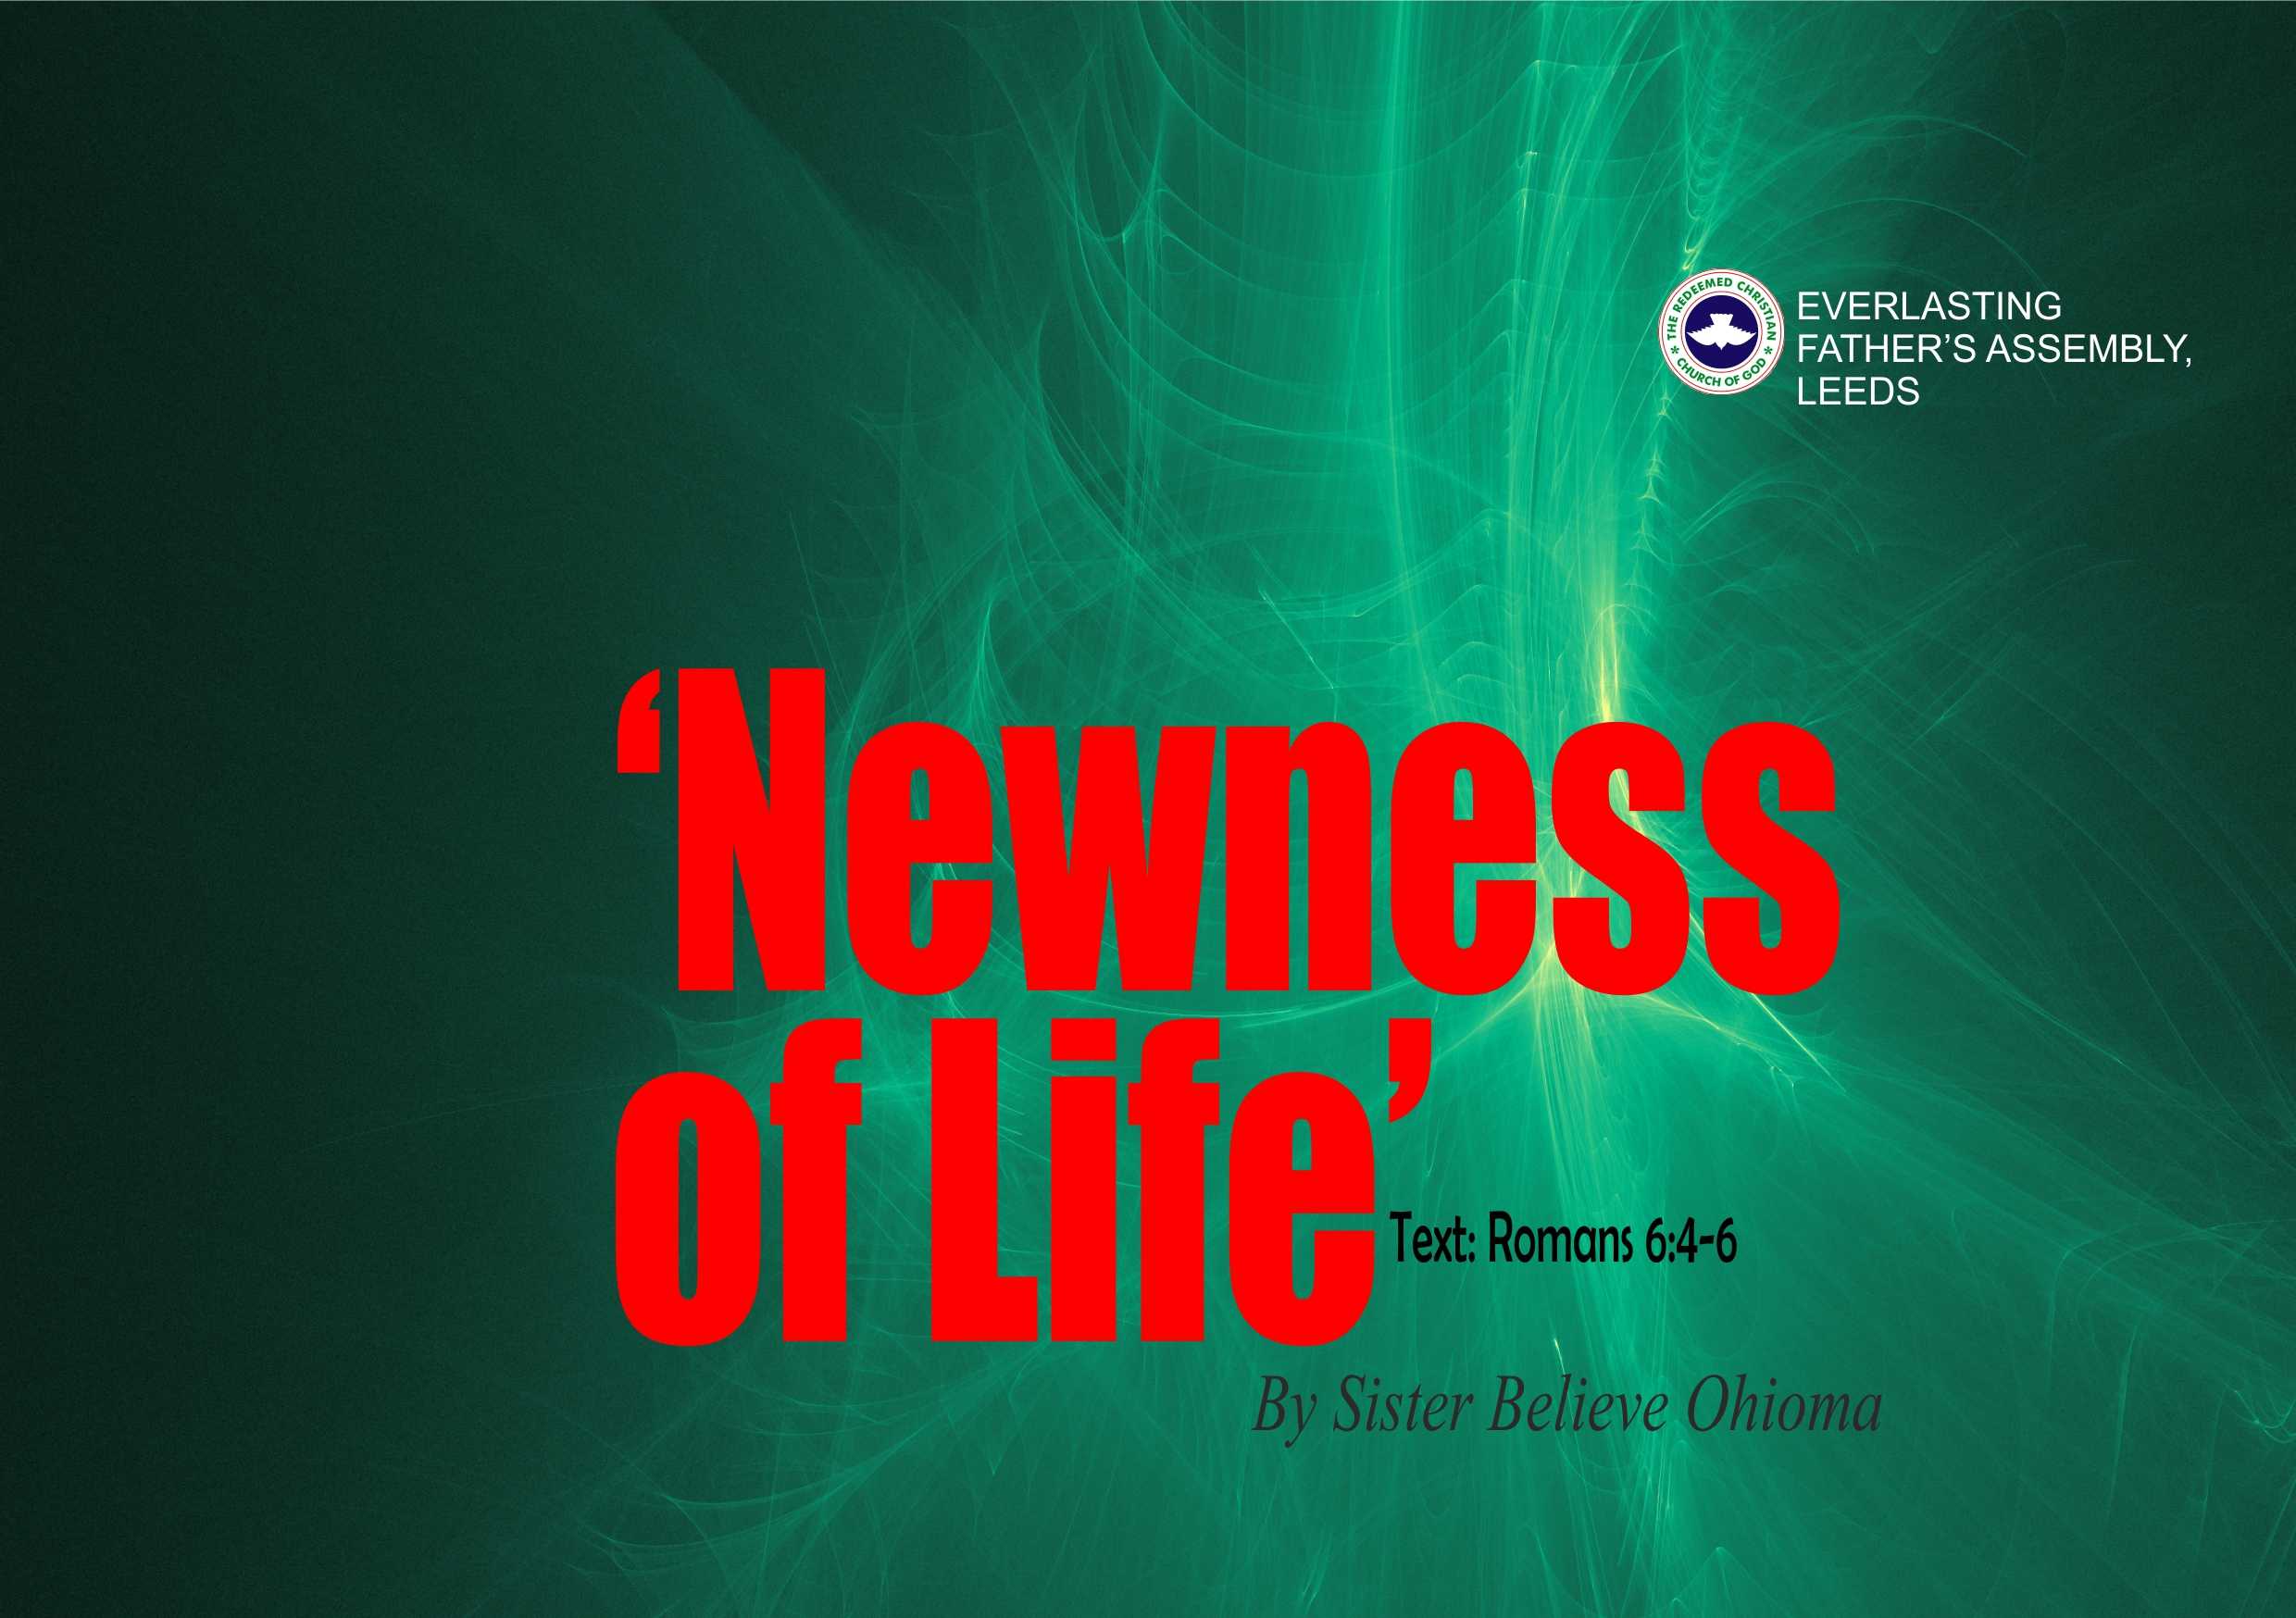 Newness of Life, by Sister Believe Ohioma